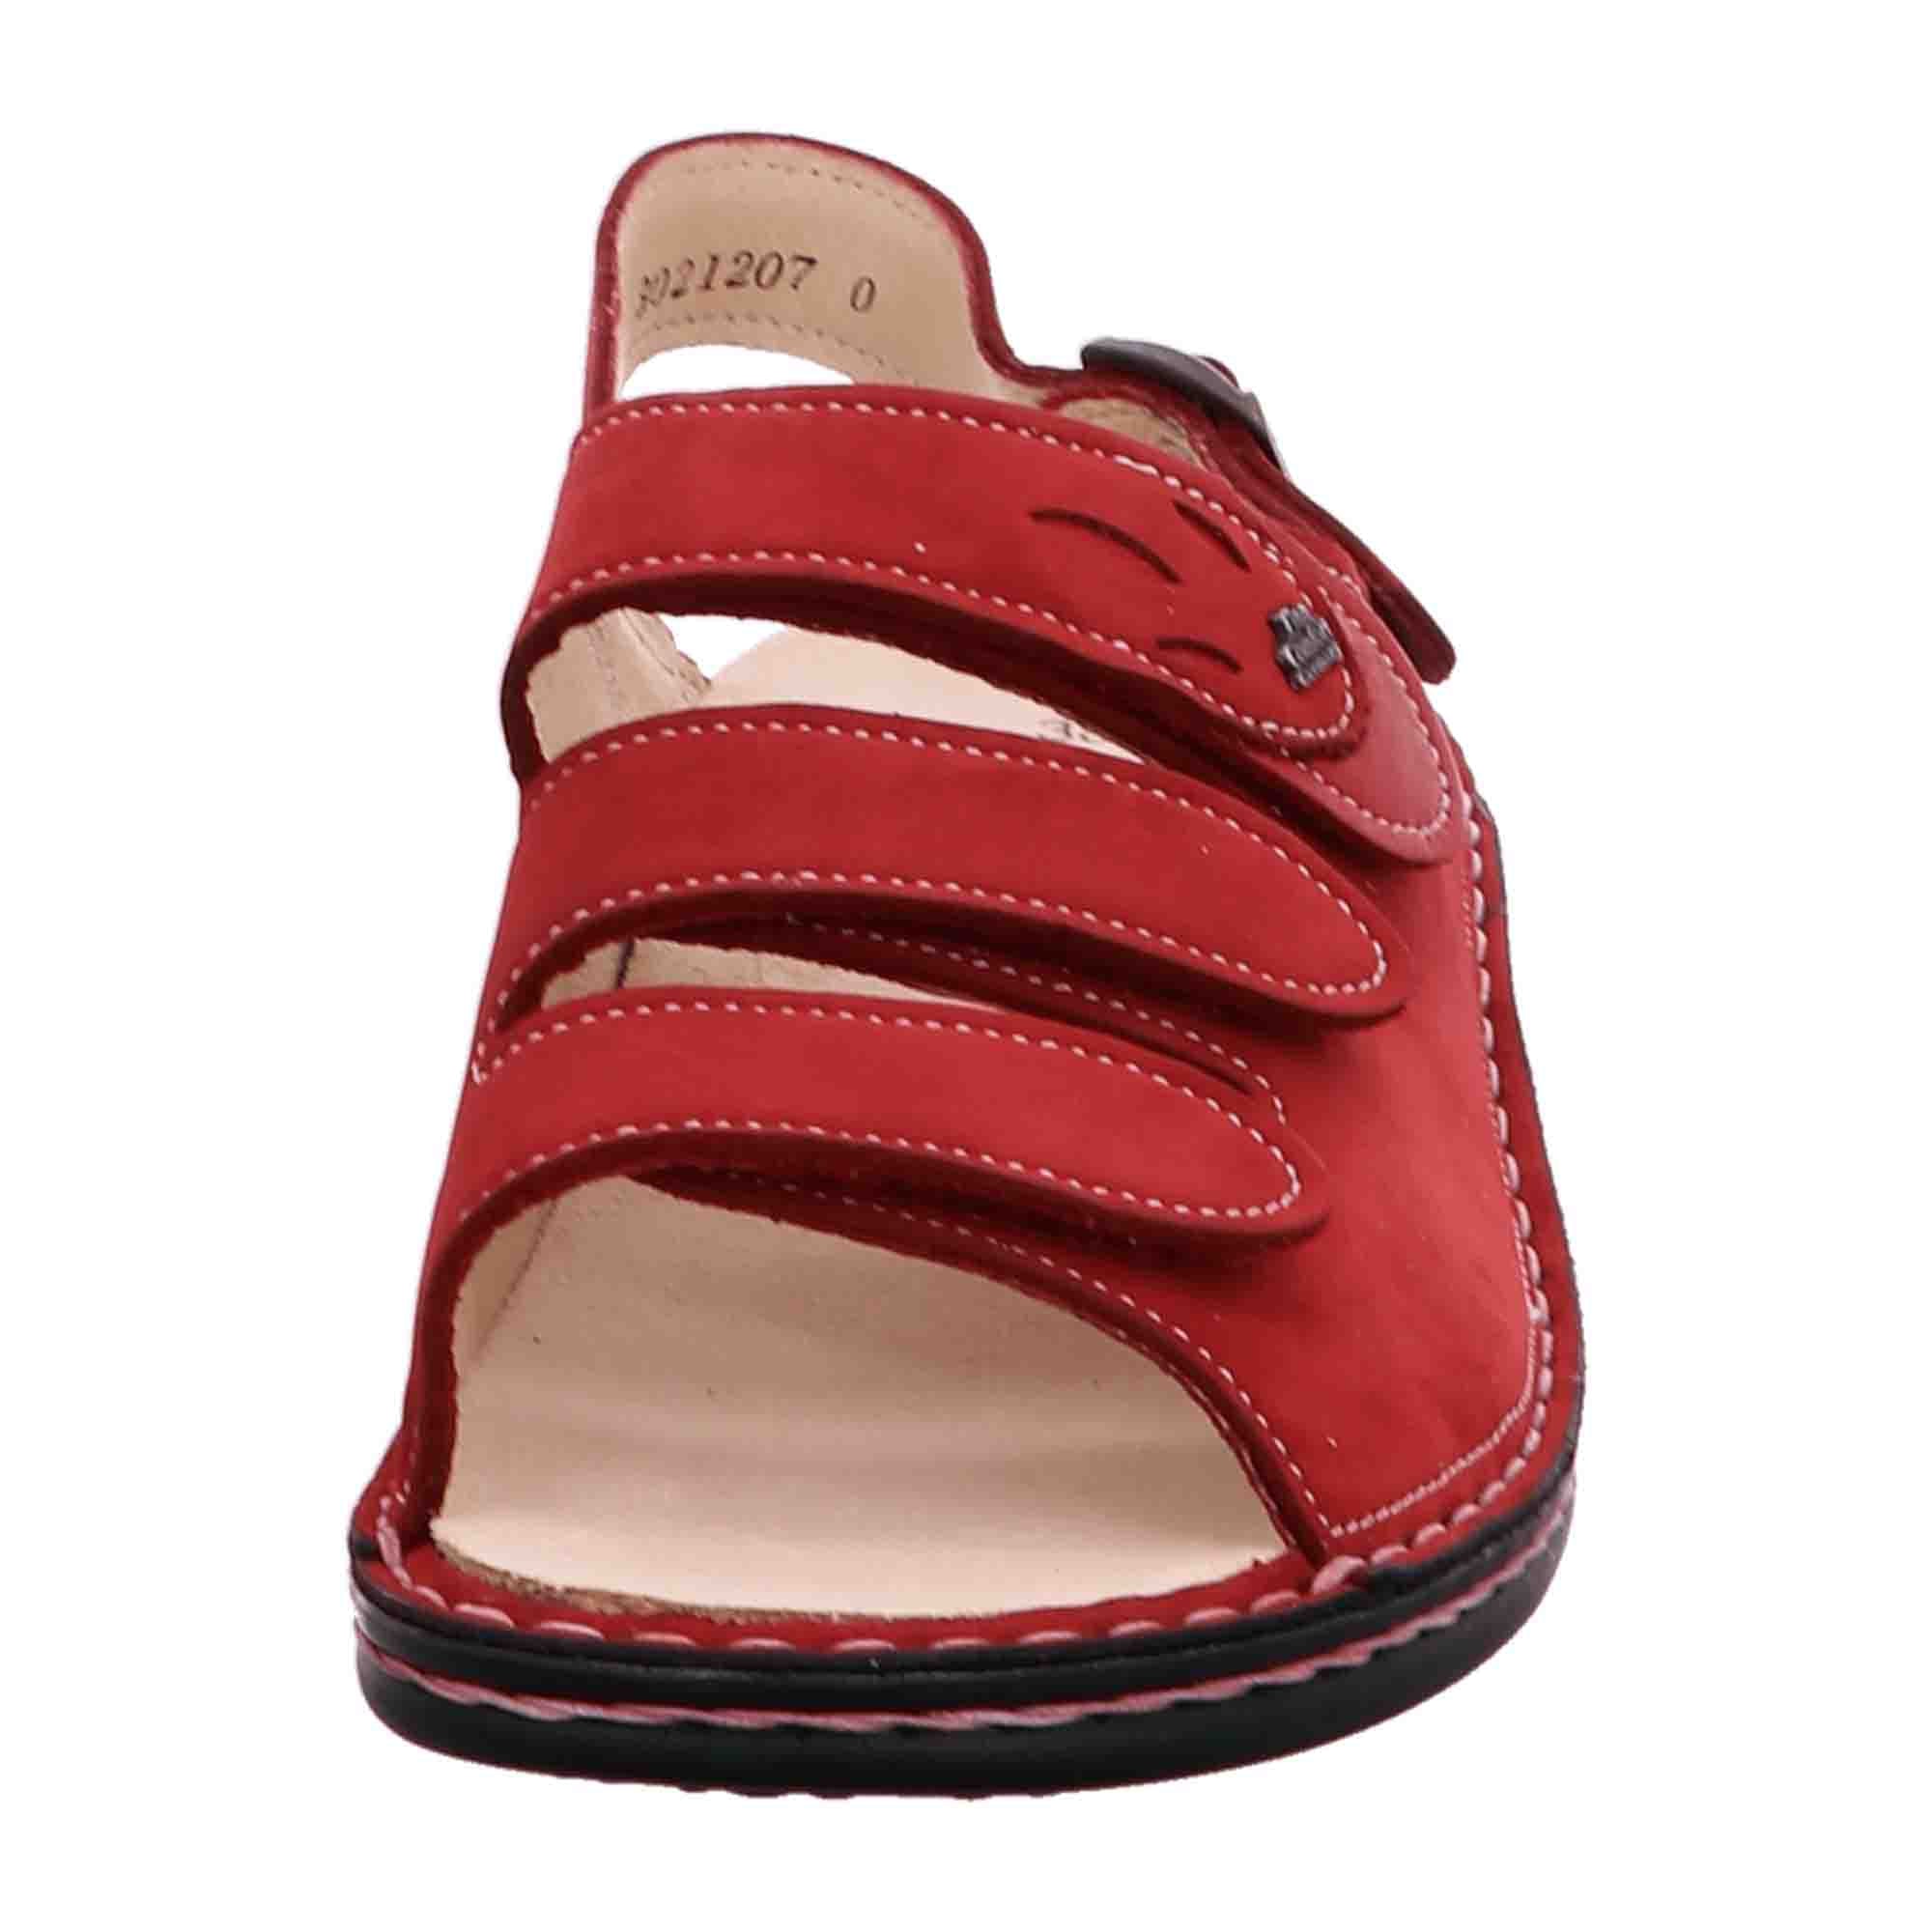 Finn Comfort Saloniki Women's Sandals - Nubuck Leather Comfort Sandals with Removable Insoles in Chili/Pomodore Red